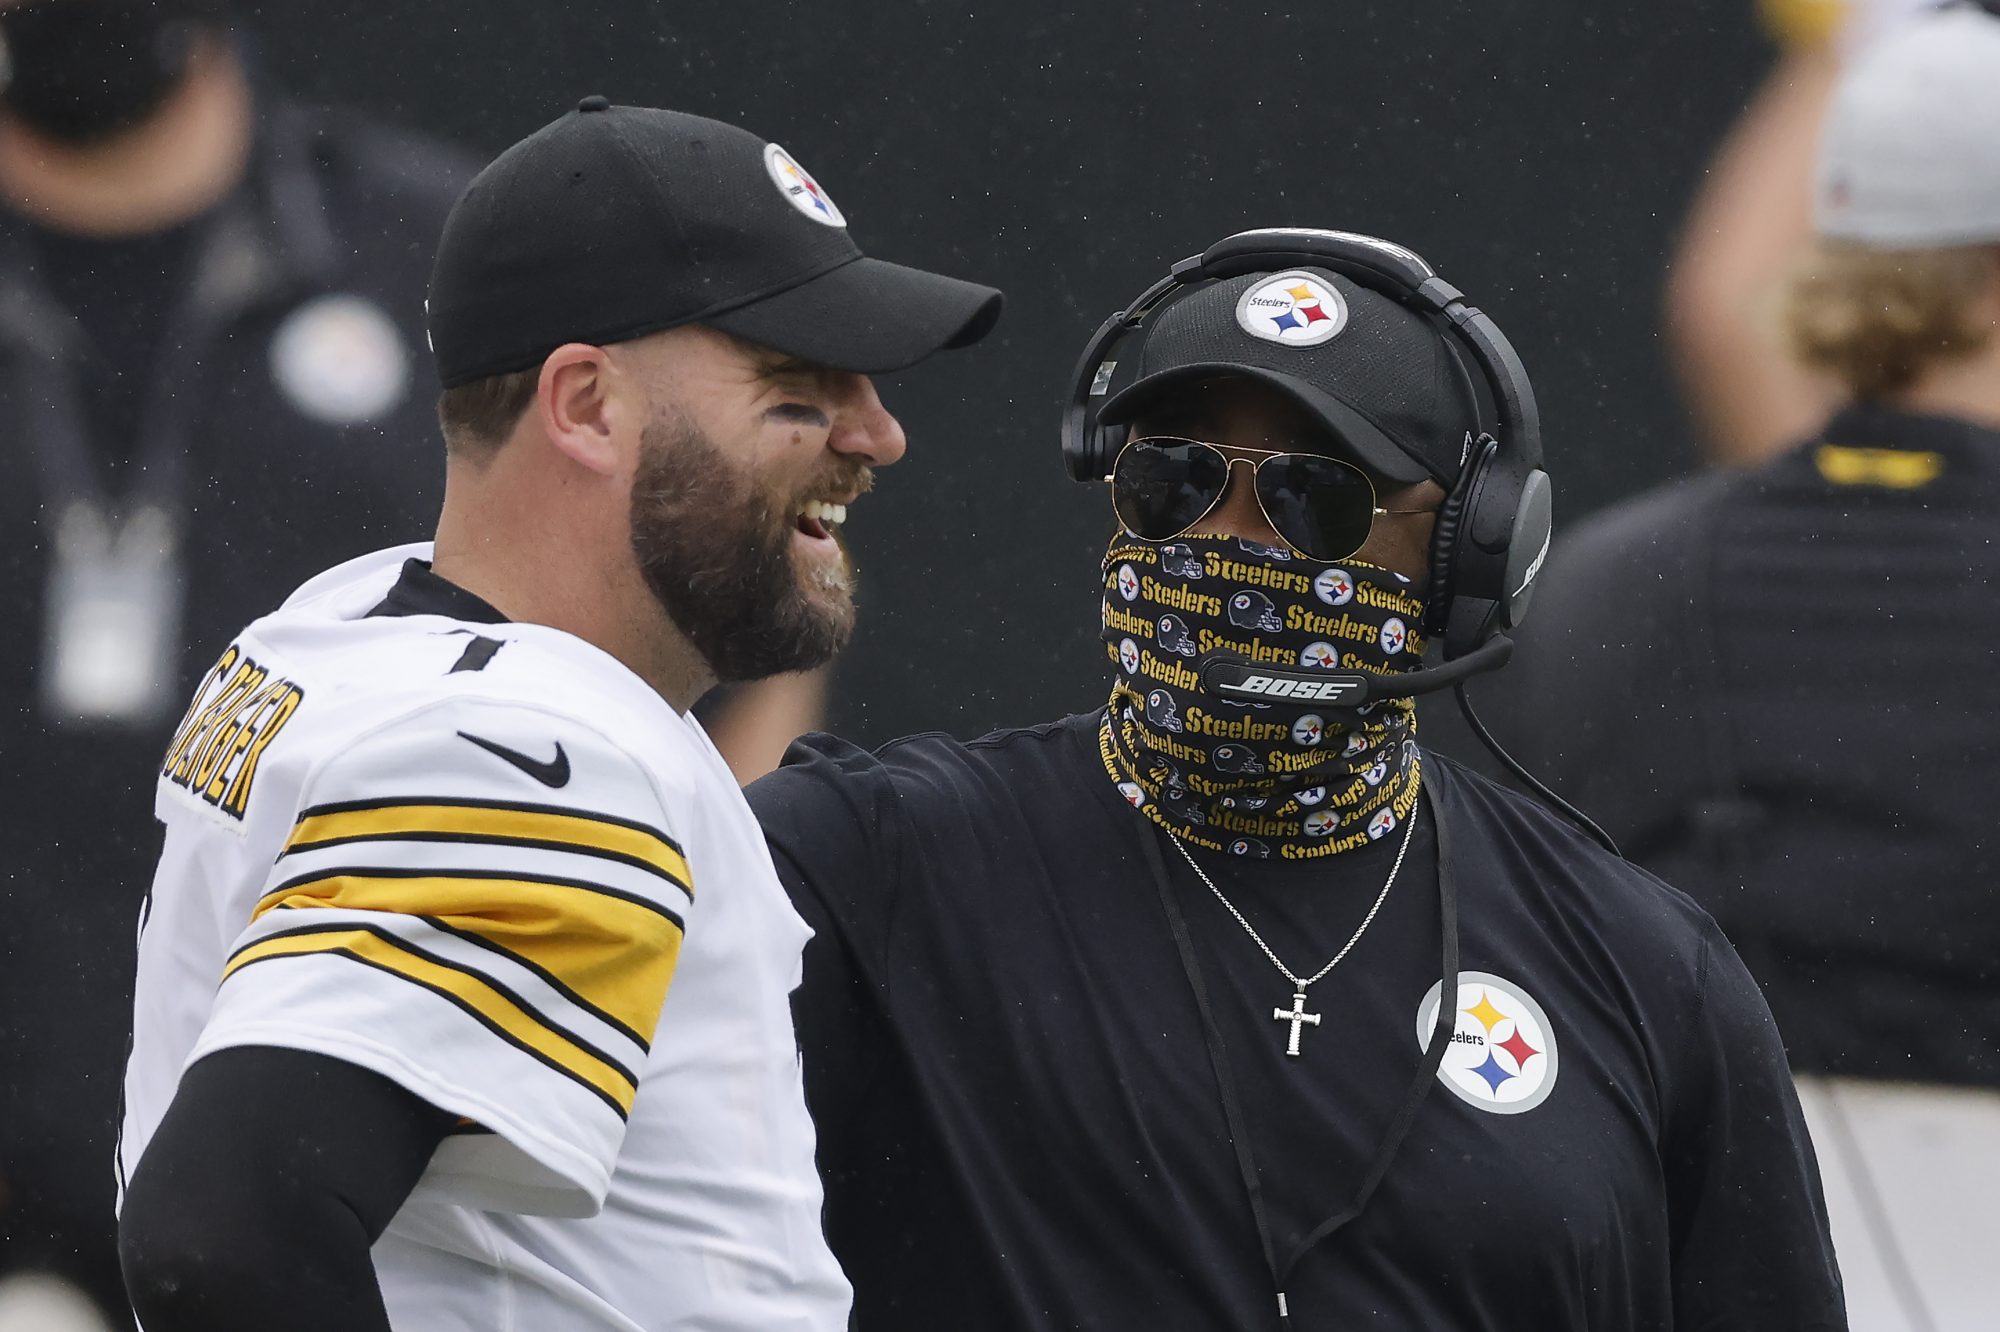 Ben Roethlisberger and Mike Tomlin chat on the sidelines.